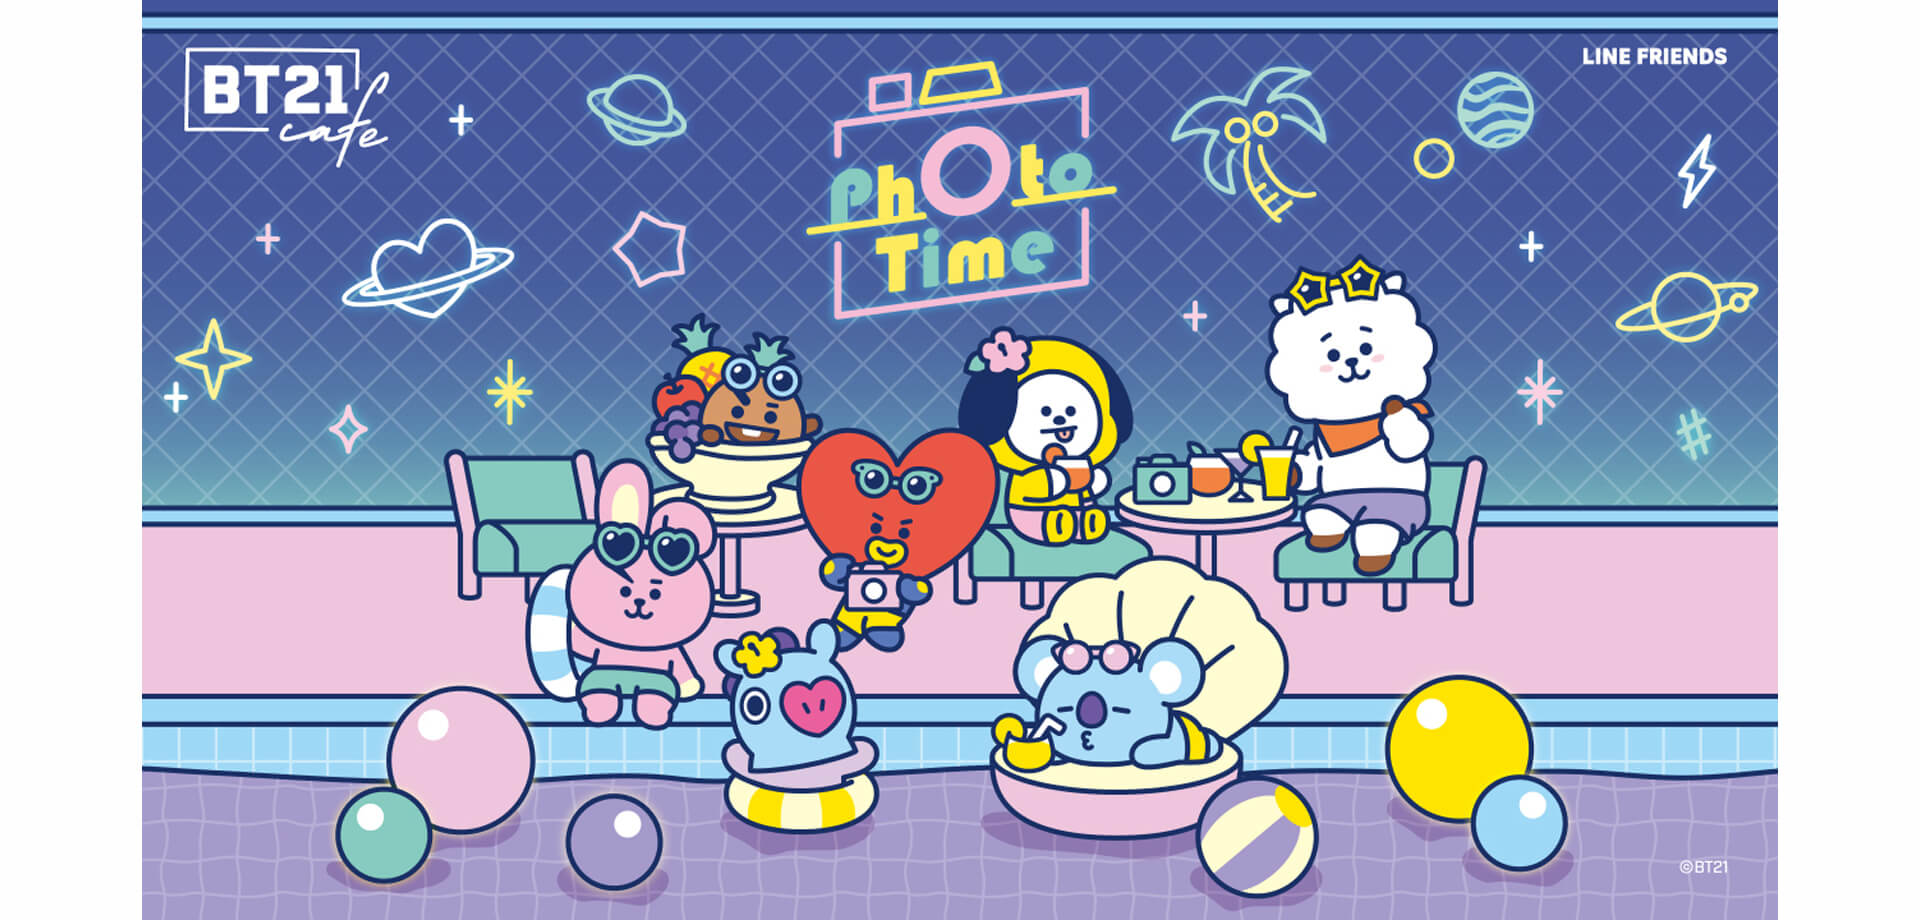 「BT21カフェ」第12弾～PHOTO TIME～